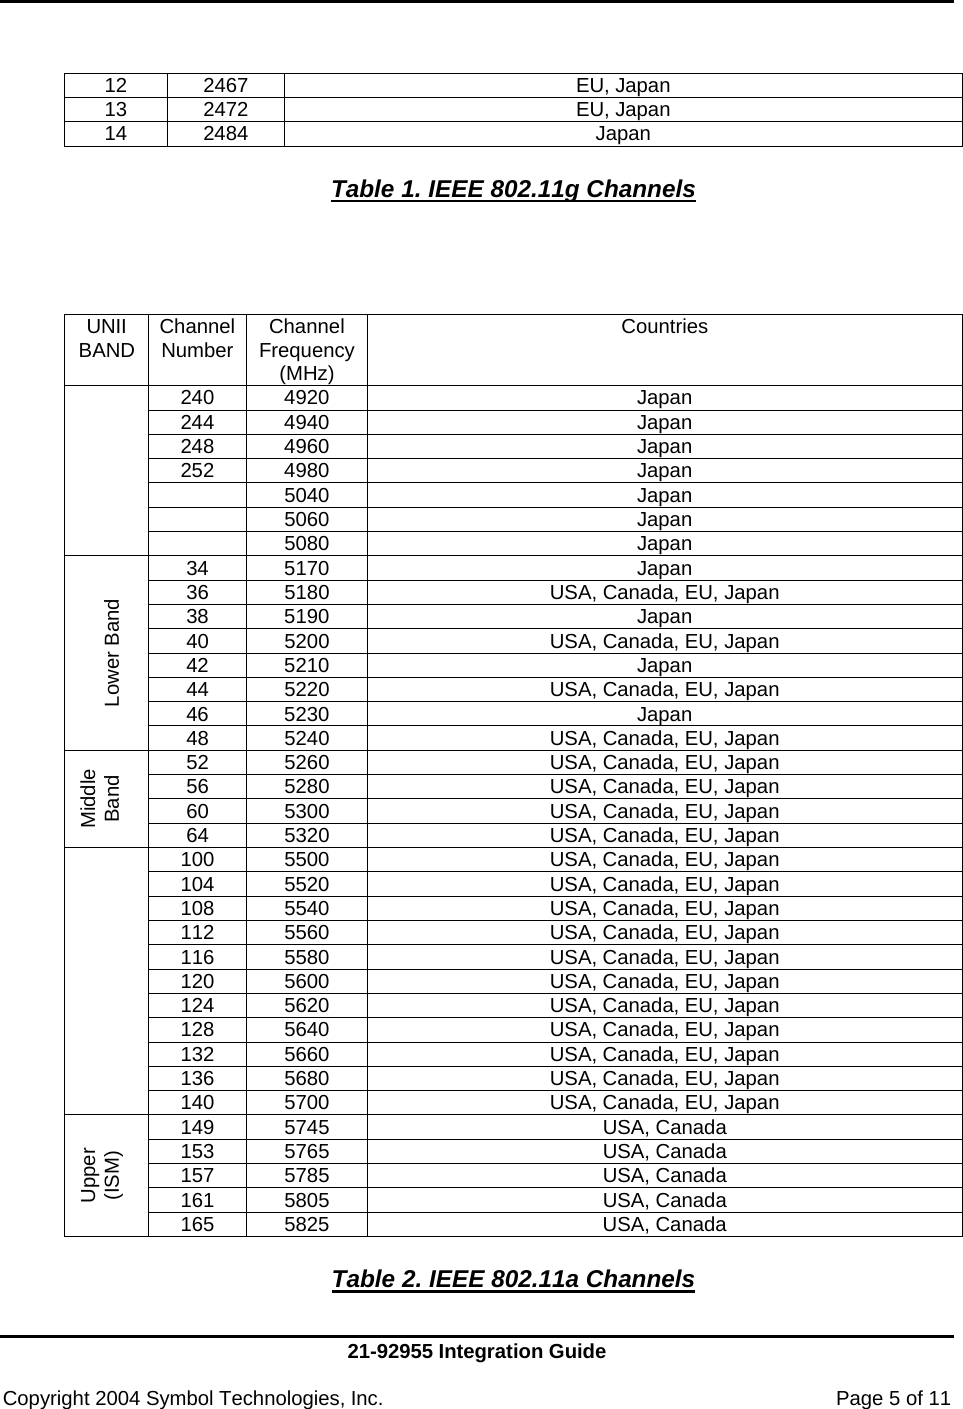     21-92955 Integration Guide  Copyright 2004 Symbol Technologies, Inc.    Page 5 of 11  12 2467  EU, Japan 13 2472  EU, Japan 14 2484  Japan  Table 1. IEEE 802.11g Channels     UNII BAND  Channel Number Channel Frequency (MHz) Countries 240 4920  Japan 244 4940  Japan 248 4960  Japan 252 4980  Japan  5040  Japan  5060  Japan   5080  Japan 34 5170  Japan 36  5180  USA, Canada, EU, Japan 38 5190  Japan 40  5200  USA, Canada, EU, Japan 42 5210  Japan 44  5220  USA, Canada, EU, Japan 46 5230  Japan  Lower Band  48  5240  USA, Canada, EU, Japan 52  5260  USA, Canada, EU, Japan 56  5280  USA, Canada, EU, Japan 60  5300  USA, Canada, EU, Japan Middle Band  64  5320  USA, Canada, EU, Japan 100  5500  USA, Canada, EU, Japan 104  5520  USA, Canada, EU, Japan 108  5540  USA, Canada, EU, Japan 112  5560  USA, Canada, EU, Japan 116  5580  USA, Canada, EU, Japan 120  5600  USA, Canada, EU, Japan 124  5620  USA, Canada, EU, Japan 128  5640  USA, Canada, EU, Japan 132  5660  USA, Canada, EU, Japan 136  5680  USA, Canada, EU, Japan  140  5700  USA, Canada, EU, Japan 149 5745  USA, Canada 153 5765  USA, Canada 157 5785  USA, Canada 161 5805  USA, Canada Upper  (ISM)  165 5825  USA, Canada  Table 2. IEEE 802.11a Channels  